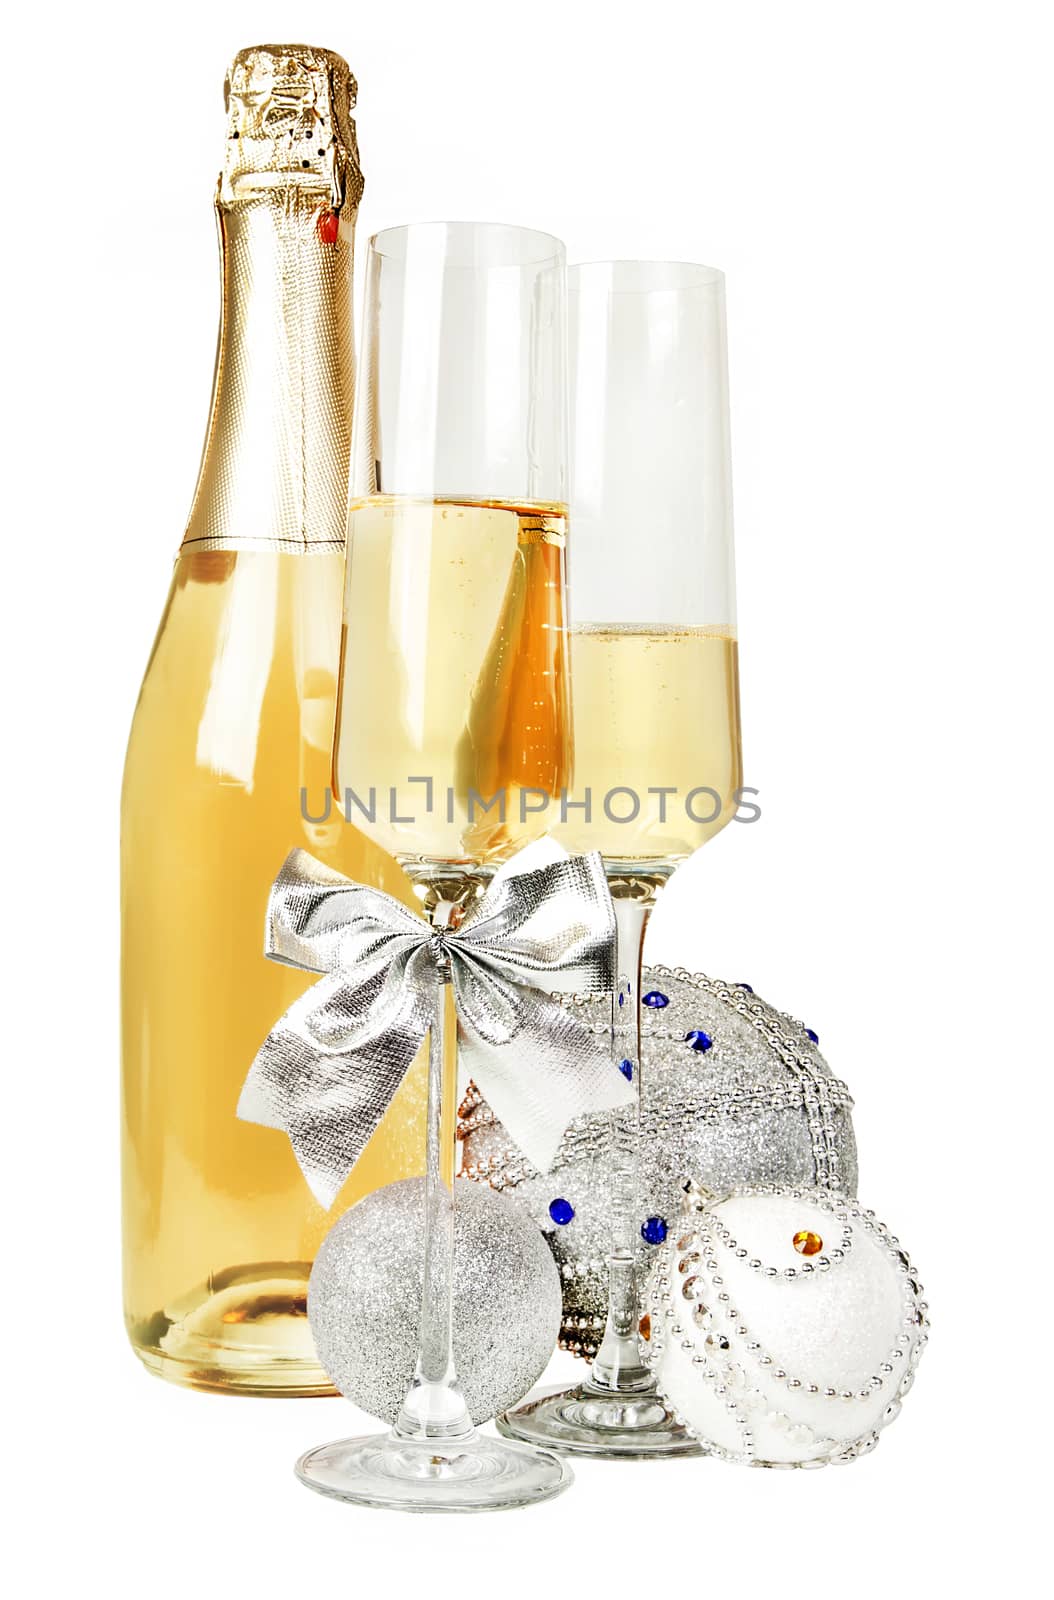 Champagne sparkling wine and new year silver composition by RawGroup